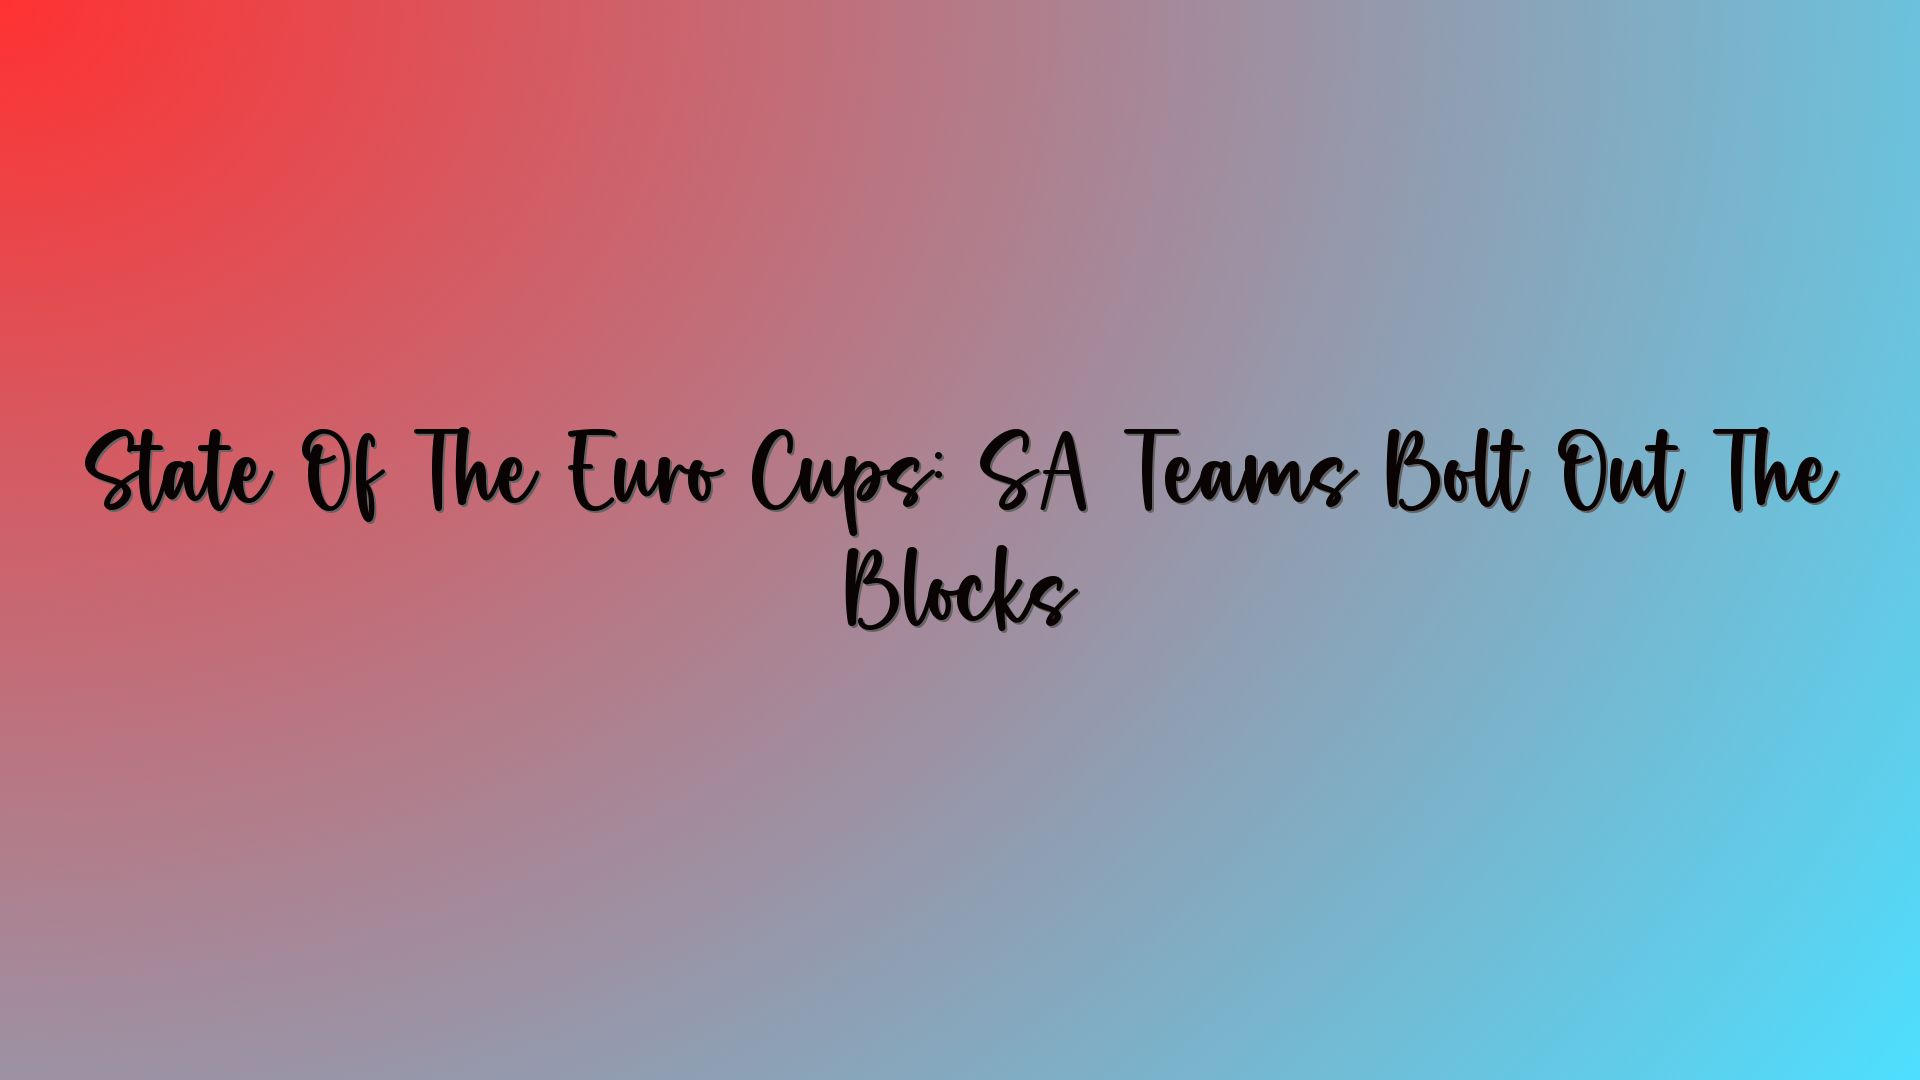 State Of The Euro Cups: SA Teams Bolt Out The Blocks